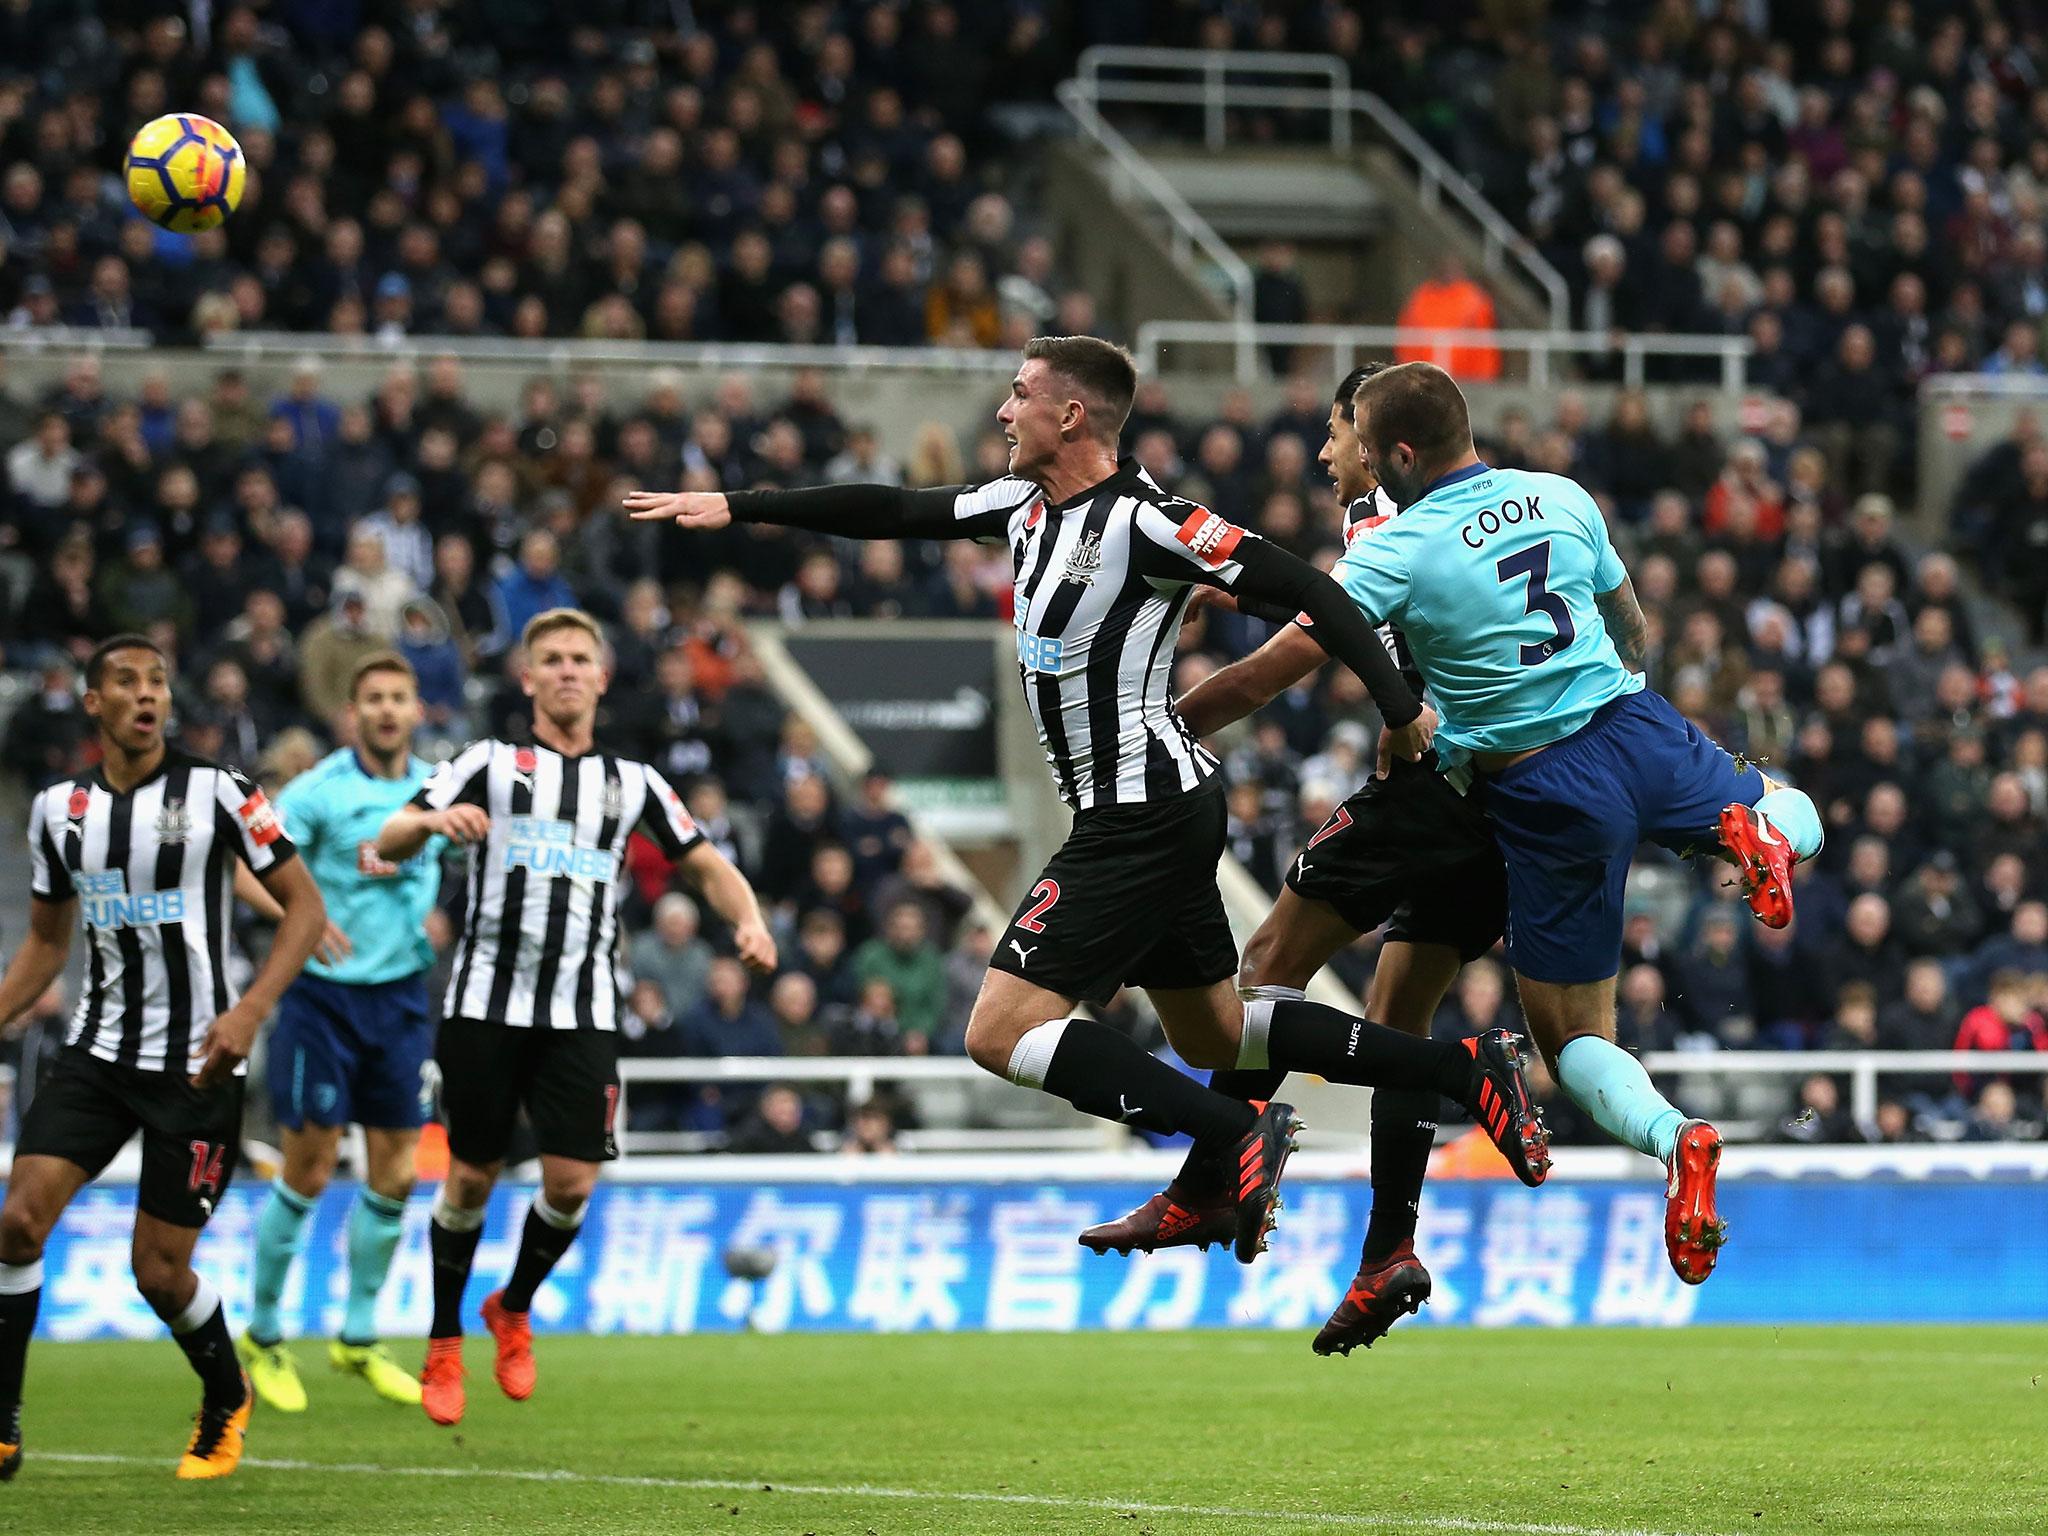 This is Newcastle's second defeat on the trot